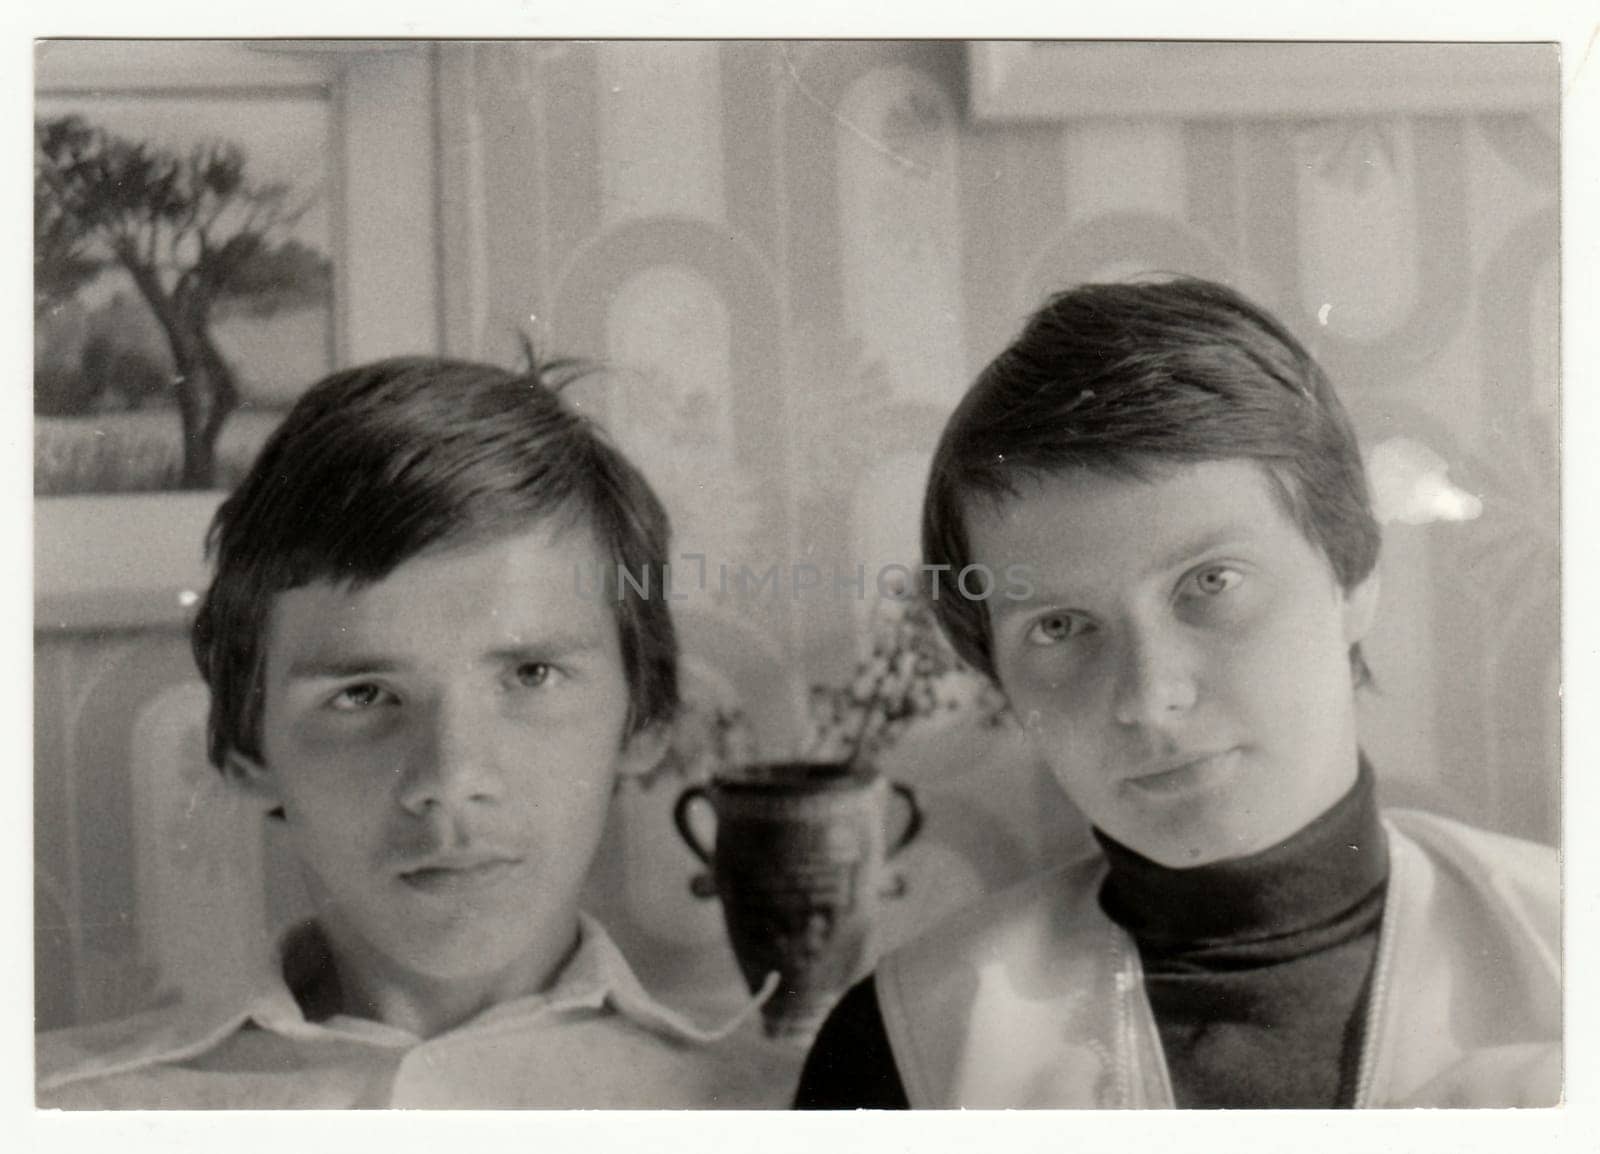 THE CZECHOSLOVAK SOCIALIST REPUBLIC - CIRCA 1980s: Vintage photo shows a portrait of two adolescent brothers. Retro black and white photography. Circa 1980s.